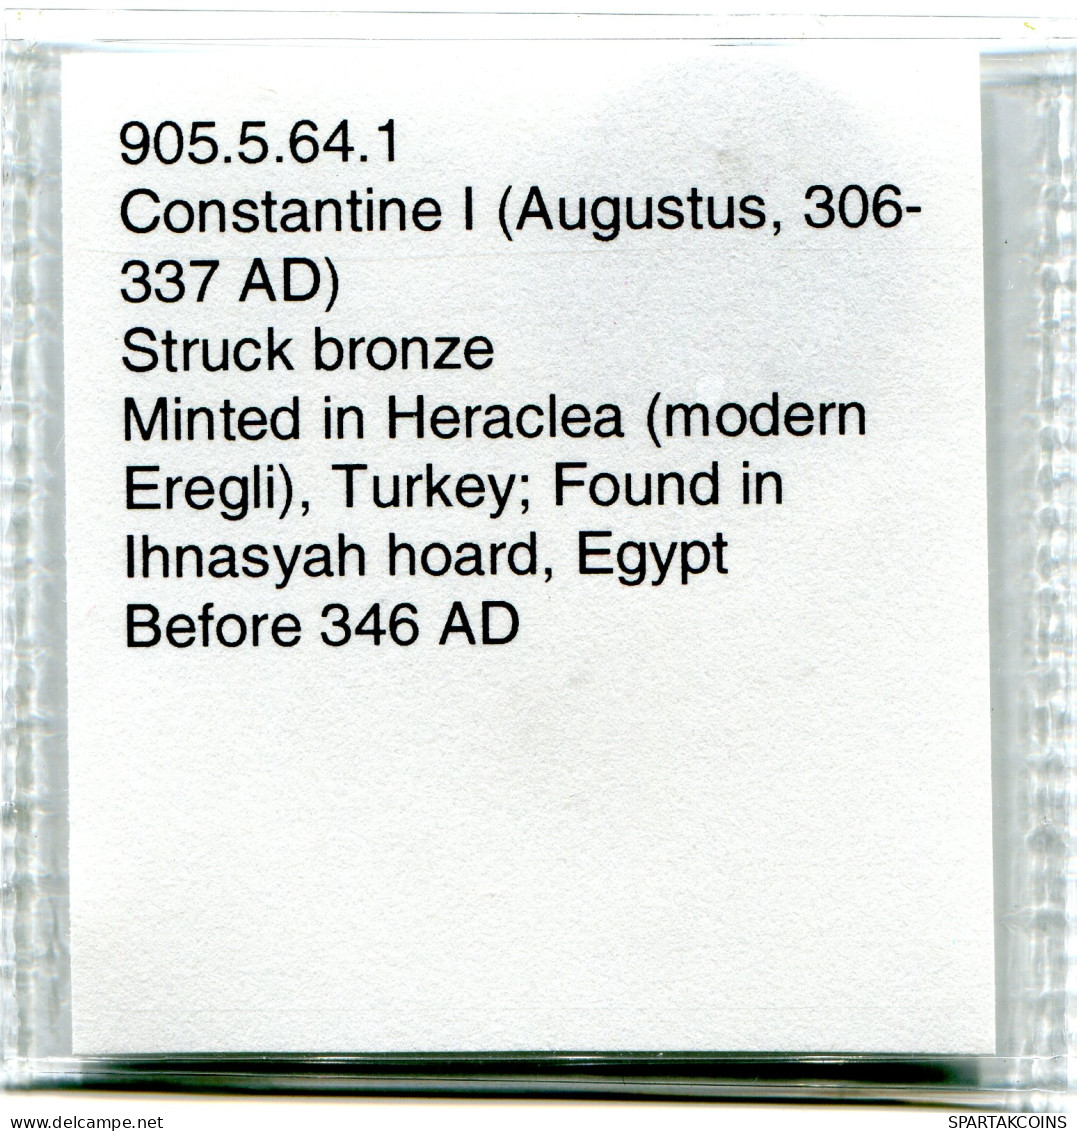 CONSTANTINE I MINTED IN HERACLEA FOUND IN IHNASYAH HOARD EGYPT #ANC11196.14.F.A - El Impero Christiano (307 / 363)